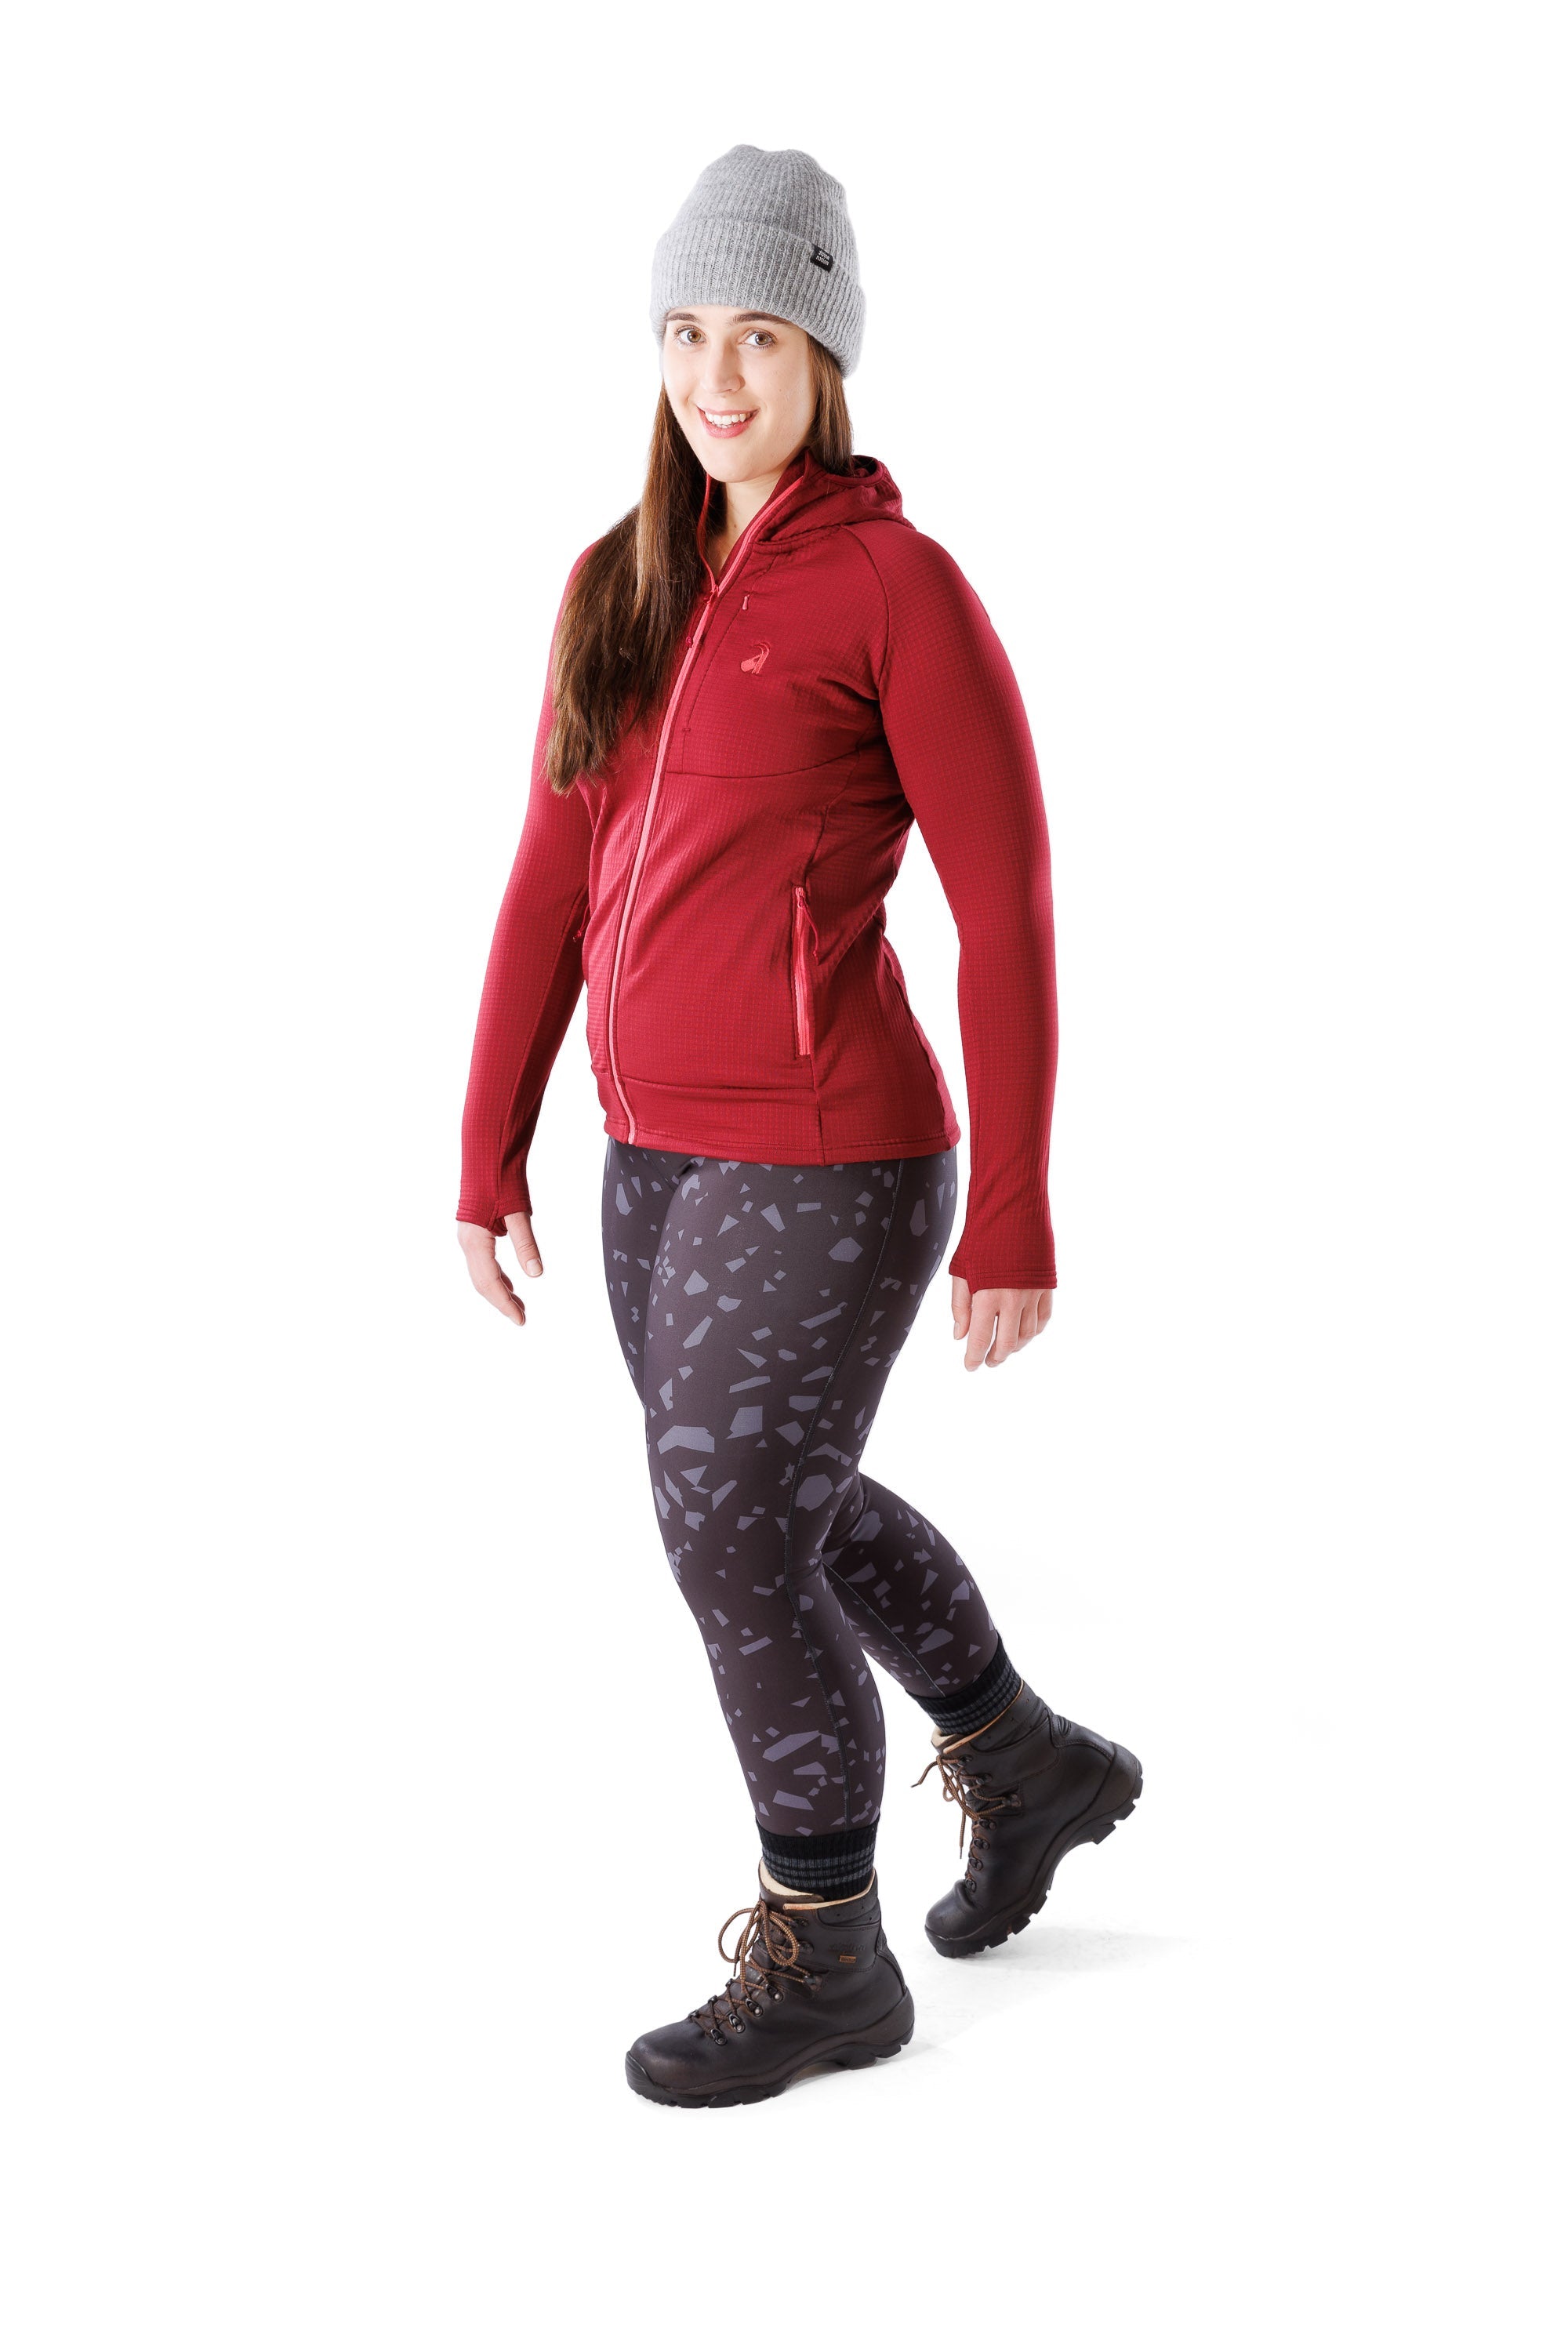 Snowflakes in the Snow Winter Leggings Outfit Active Wear Leggins